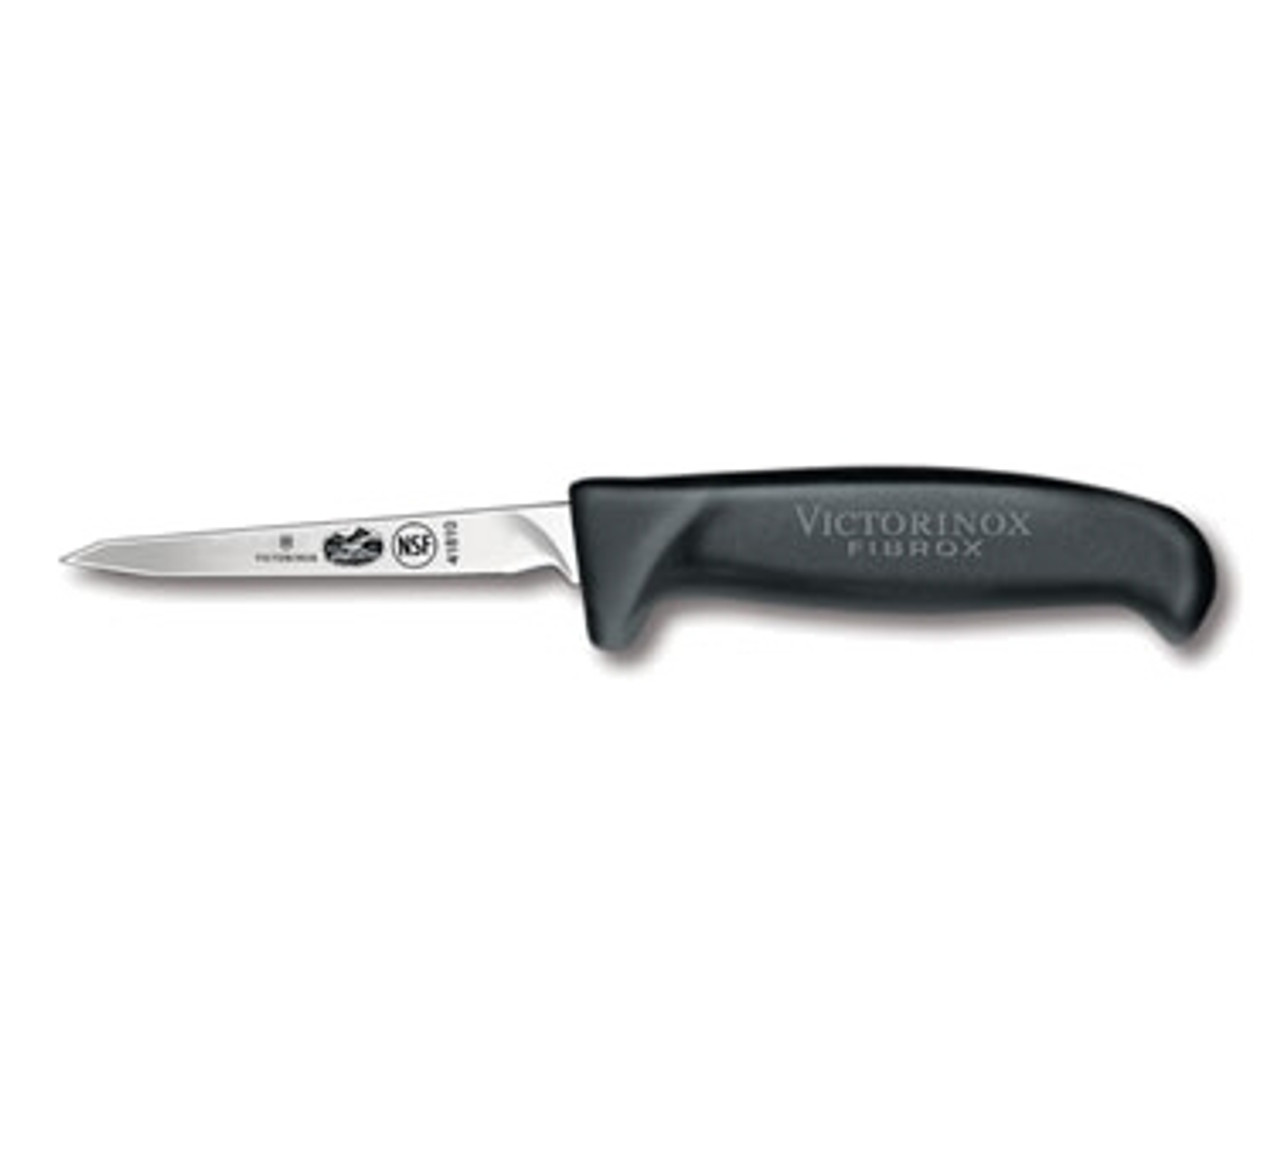 Victorinox 5.5903.08 Poultry Knife with 3" Blade - Small Handle